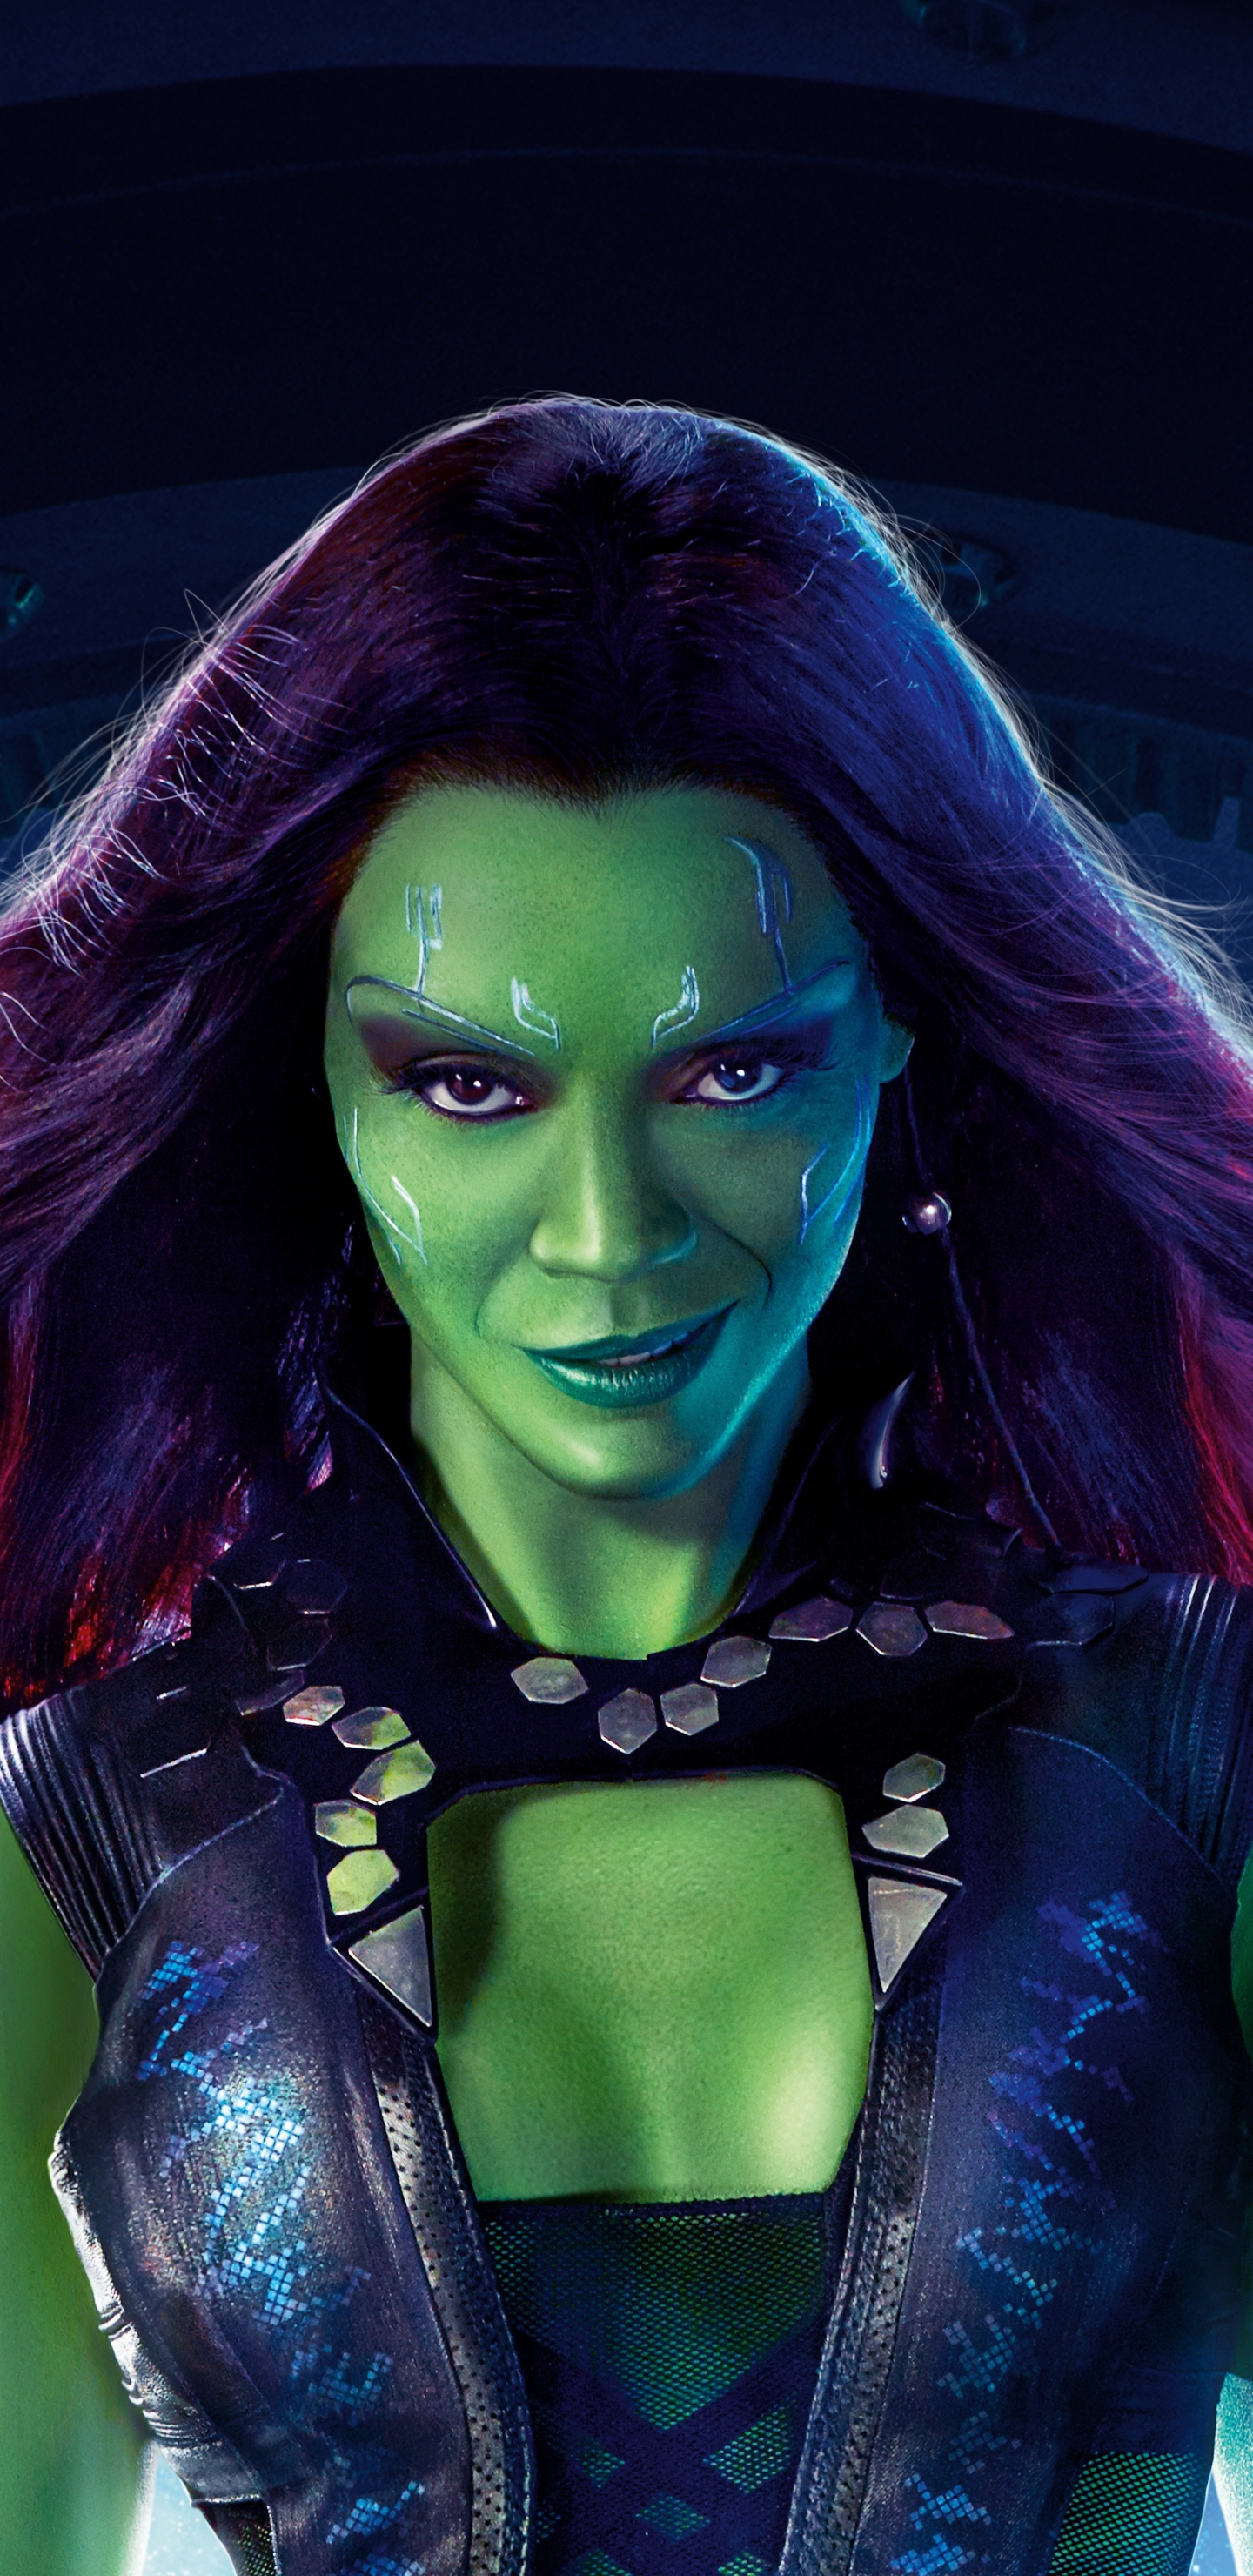 Download 1440x2960 wallpaper gamora, guardians of the galaxy, samsung galaxy s samsung galaxy s8 plus, 1440x2960 HD image, background, 19338